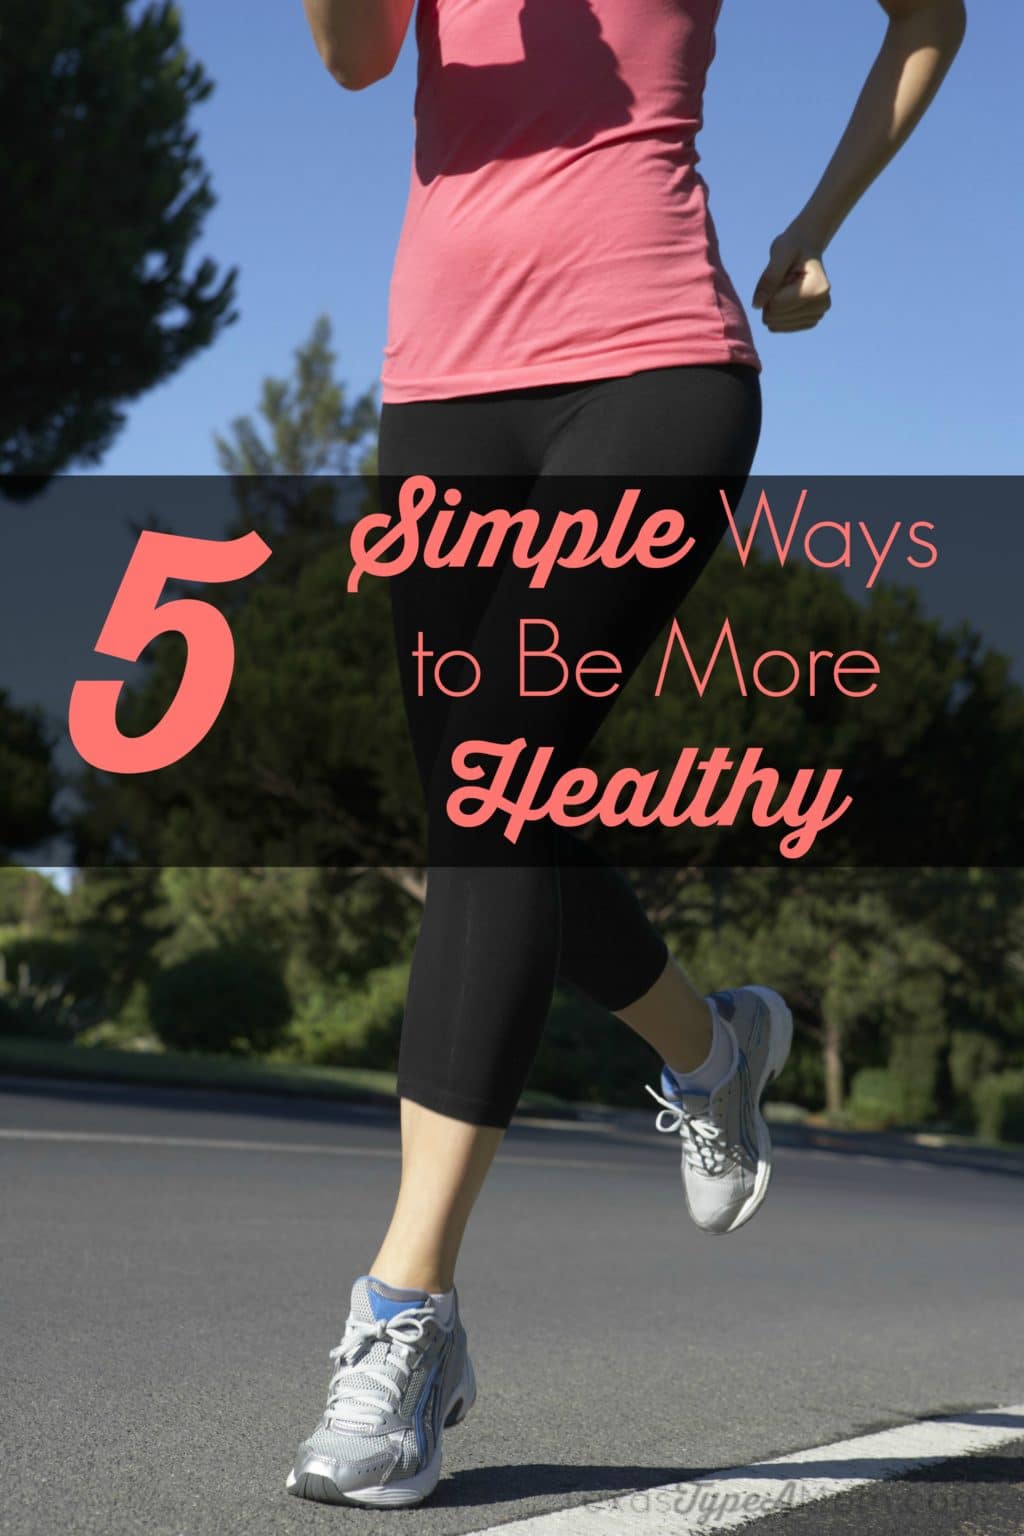 5 Simple Ways to Be More Healthy